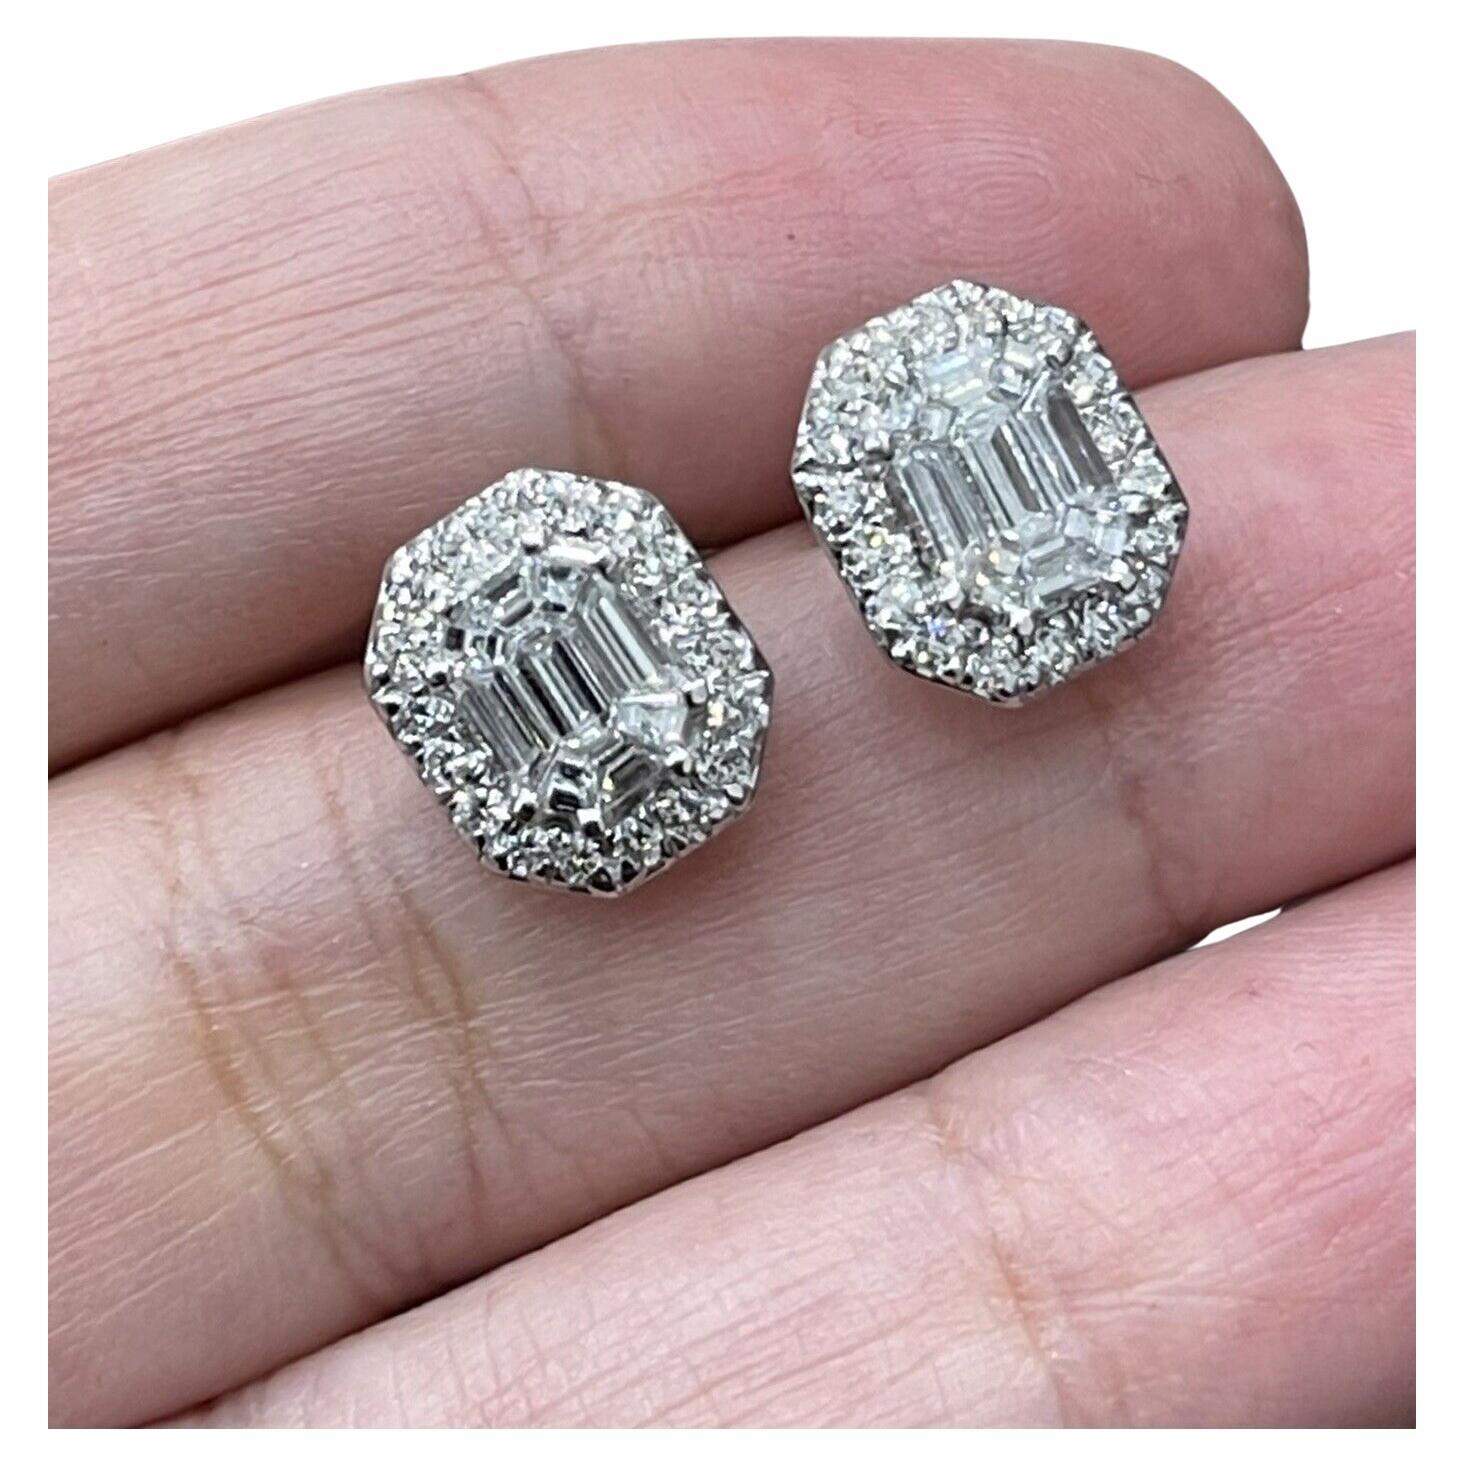 How much does 1 carat diamond earrings cost?